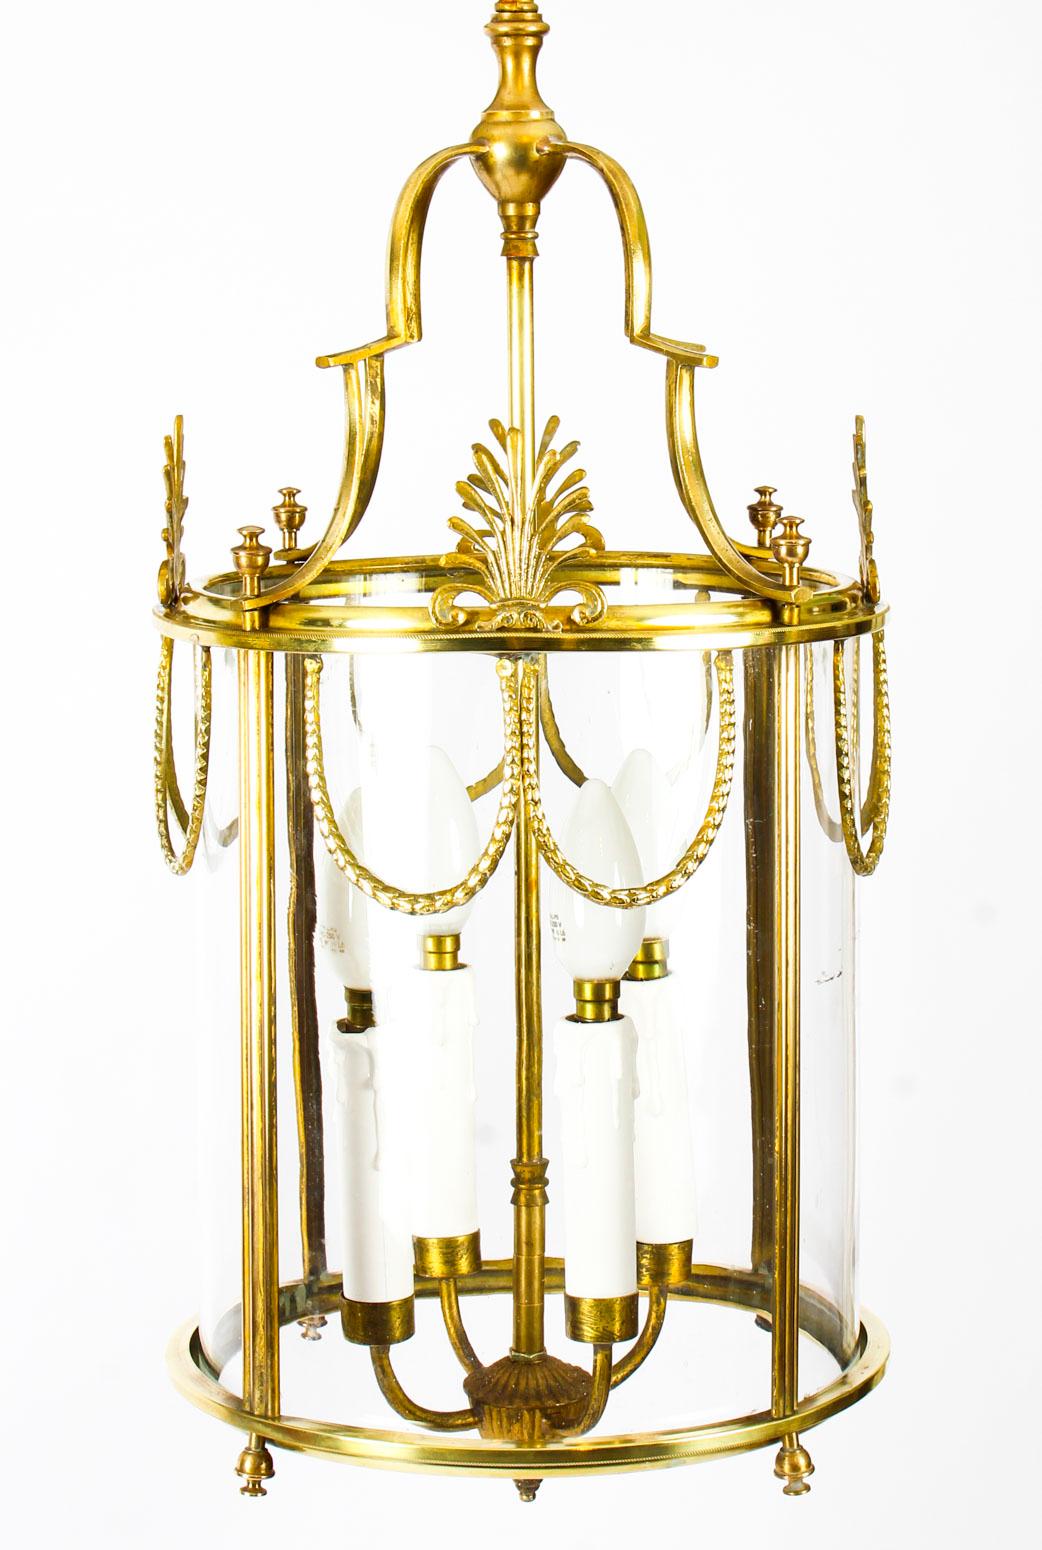 This is an elegant antique neoclassical hanging lantern made of solid brass, circa 1890 in date.

This sophisticated lantern is of circular shape and features a four light pendant which drops off a scrolled canopy.

The frame panels have highly